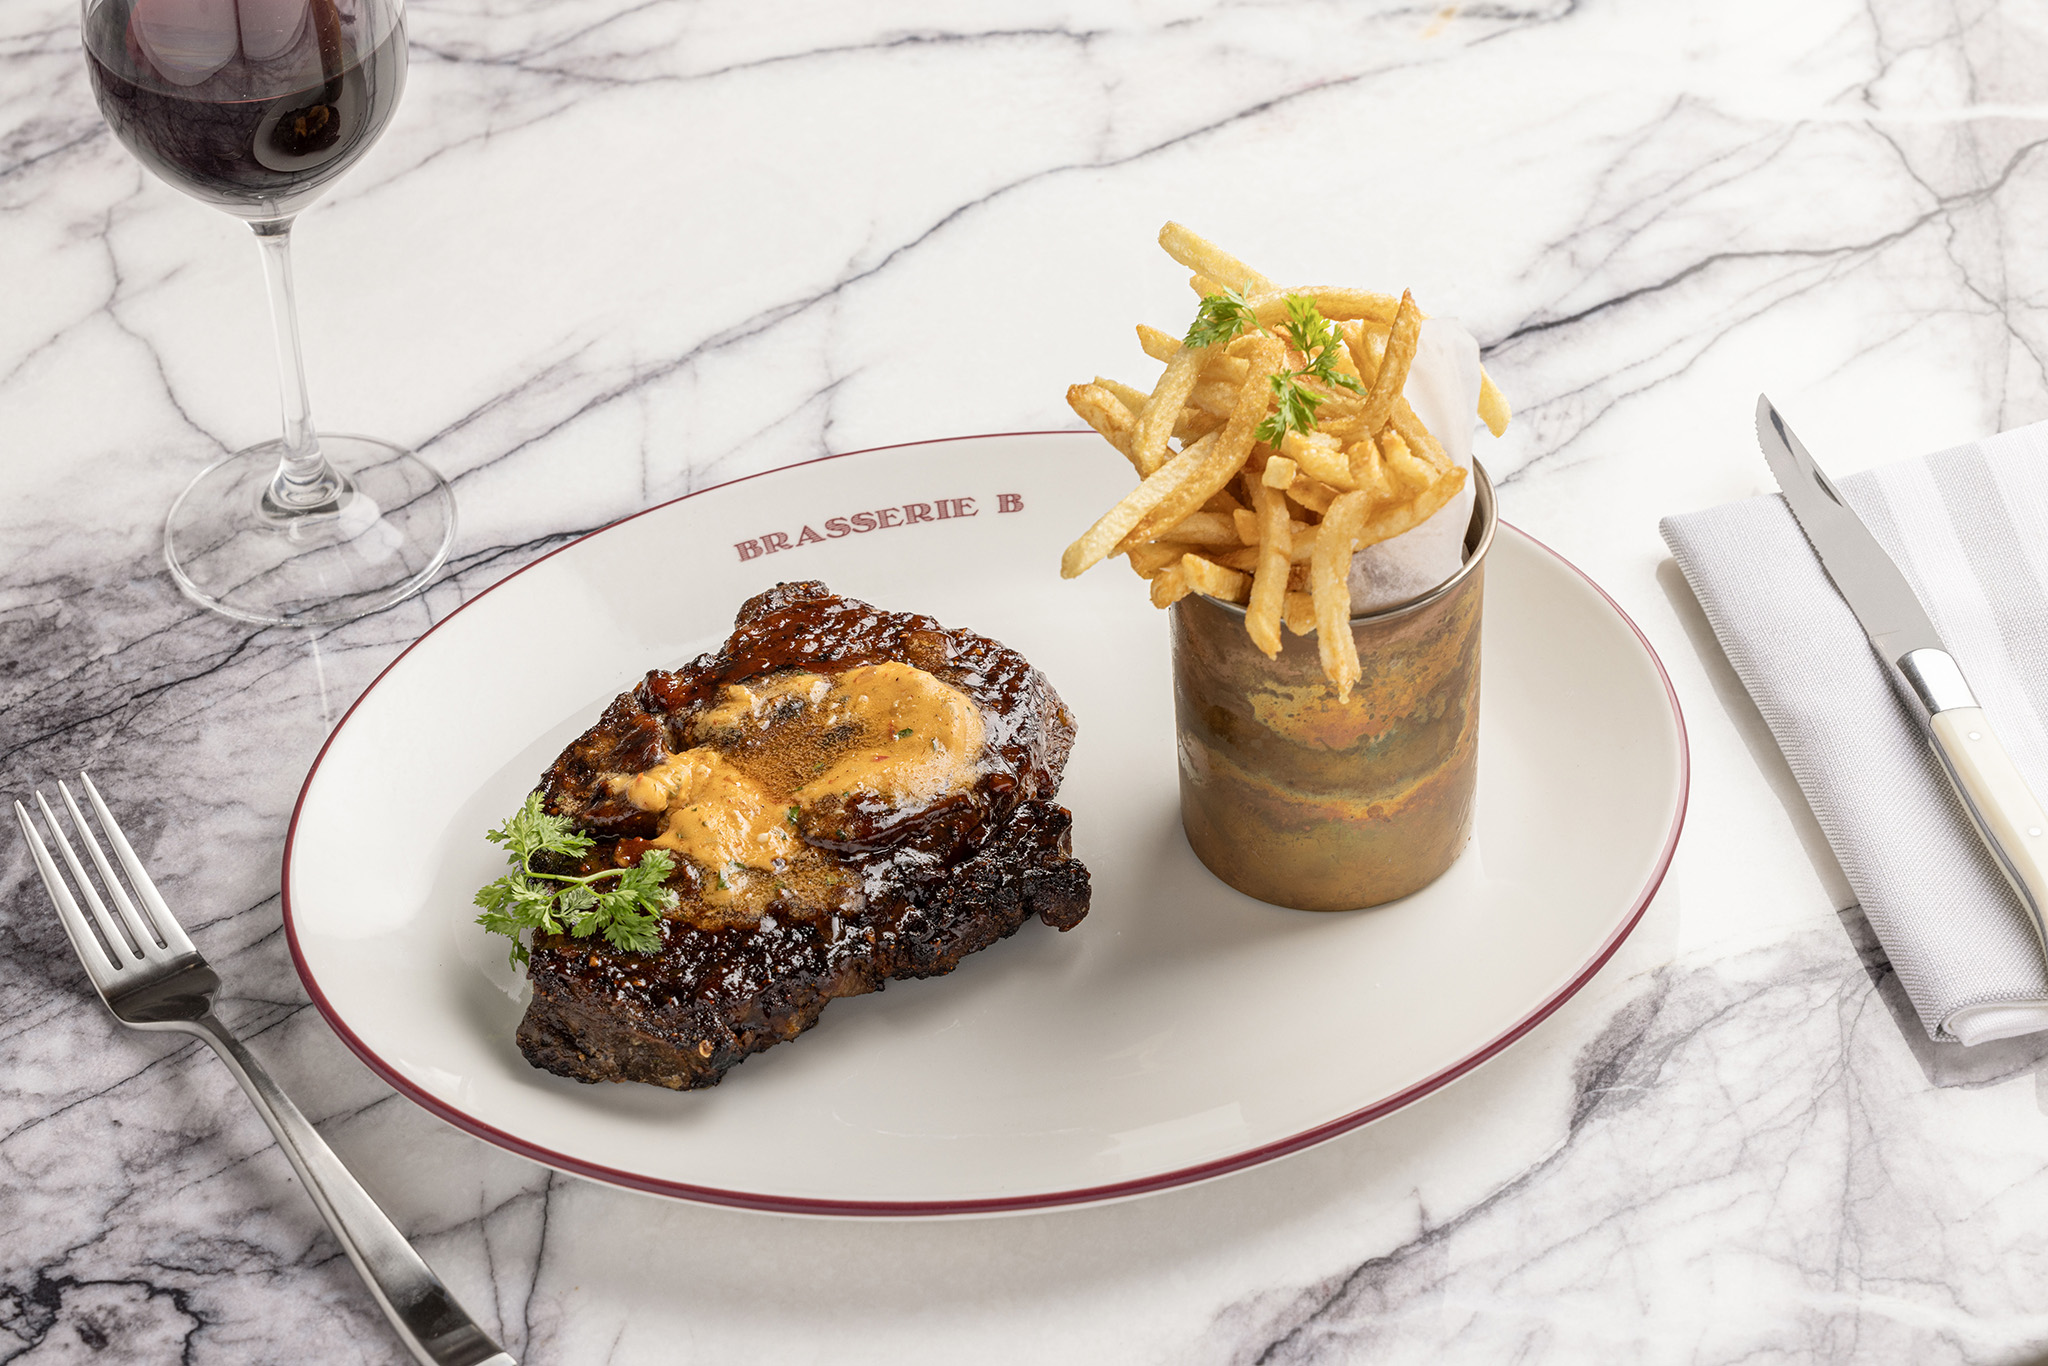 Brasserie B by Bobby Flay at Caesars Palace - Ribeye Piquant avec Frites